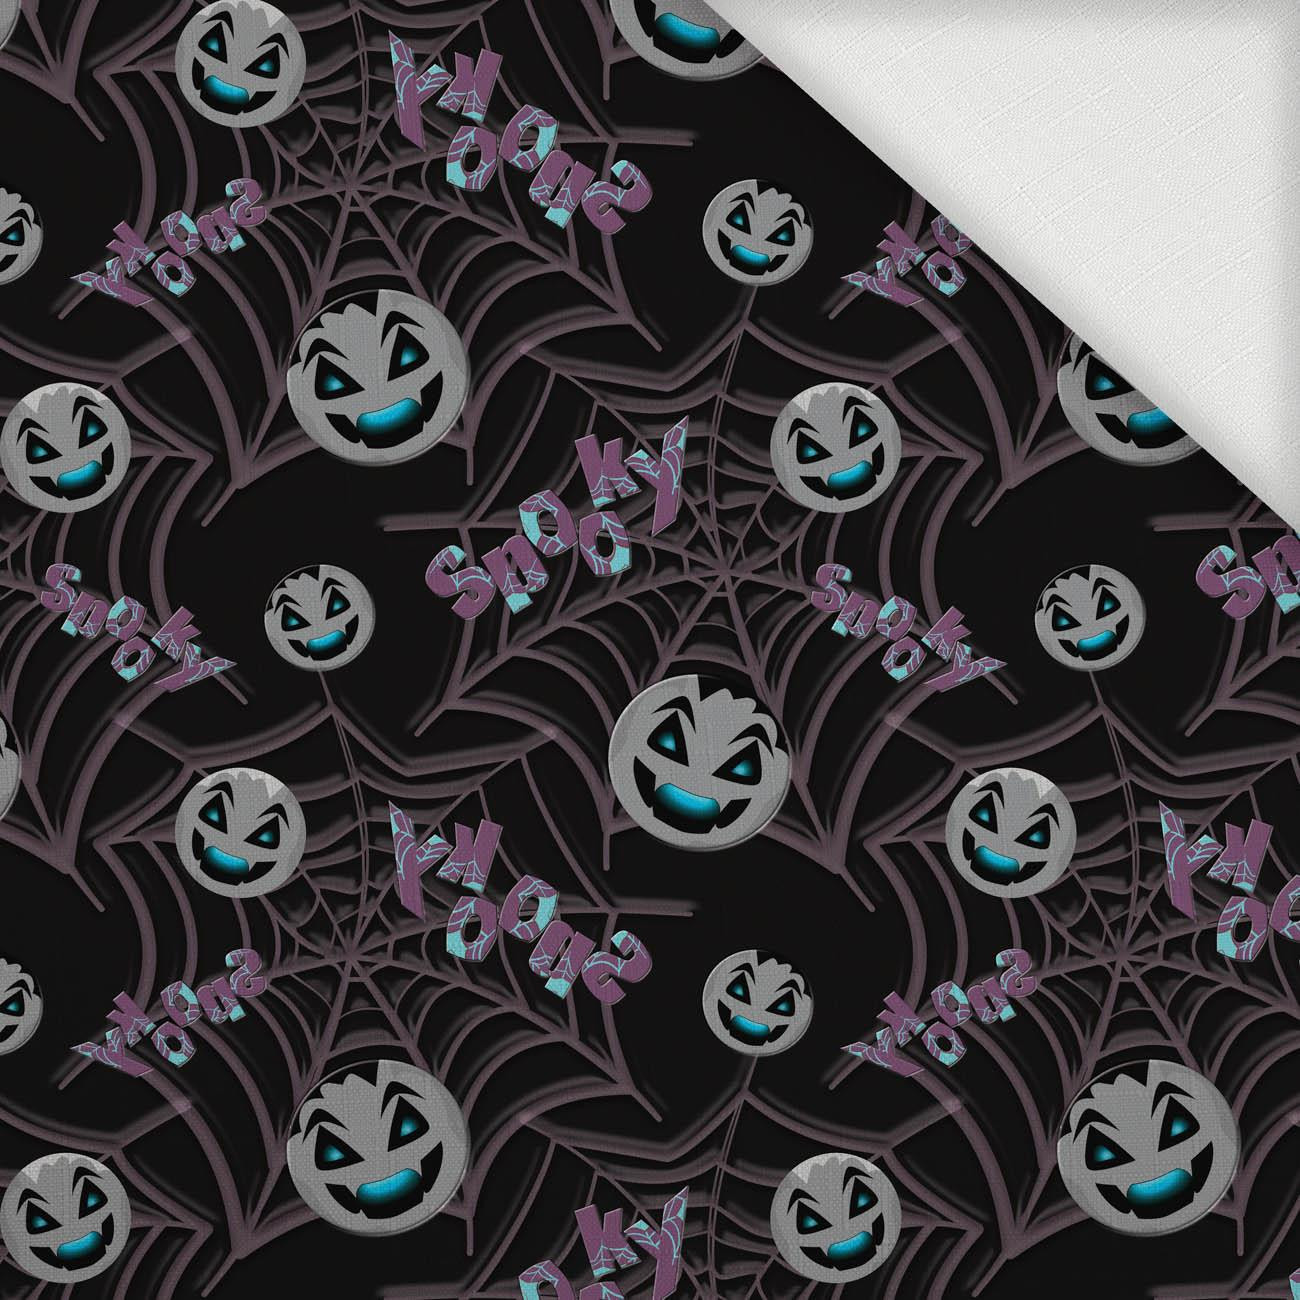 SPOOKY SMILES (SCARY HALLOWEEN) - Woven Fabric for tablecloths